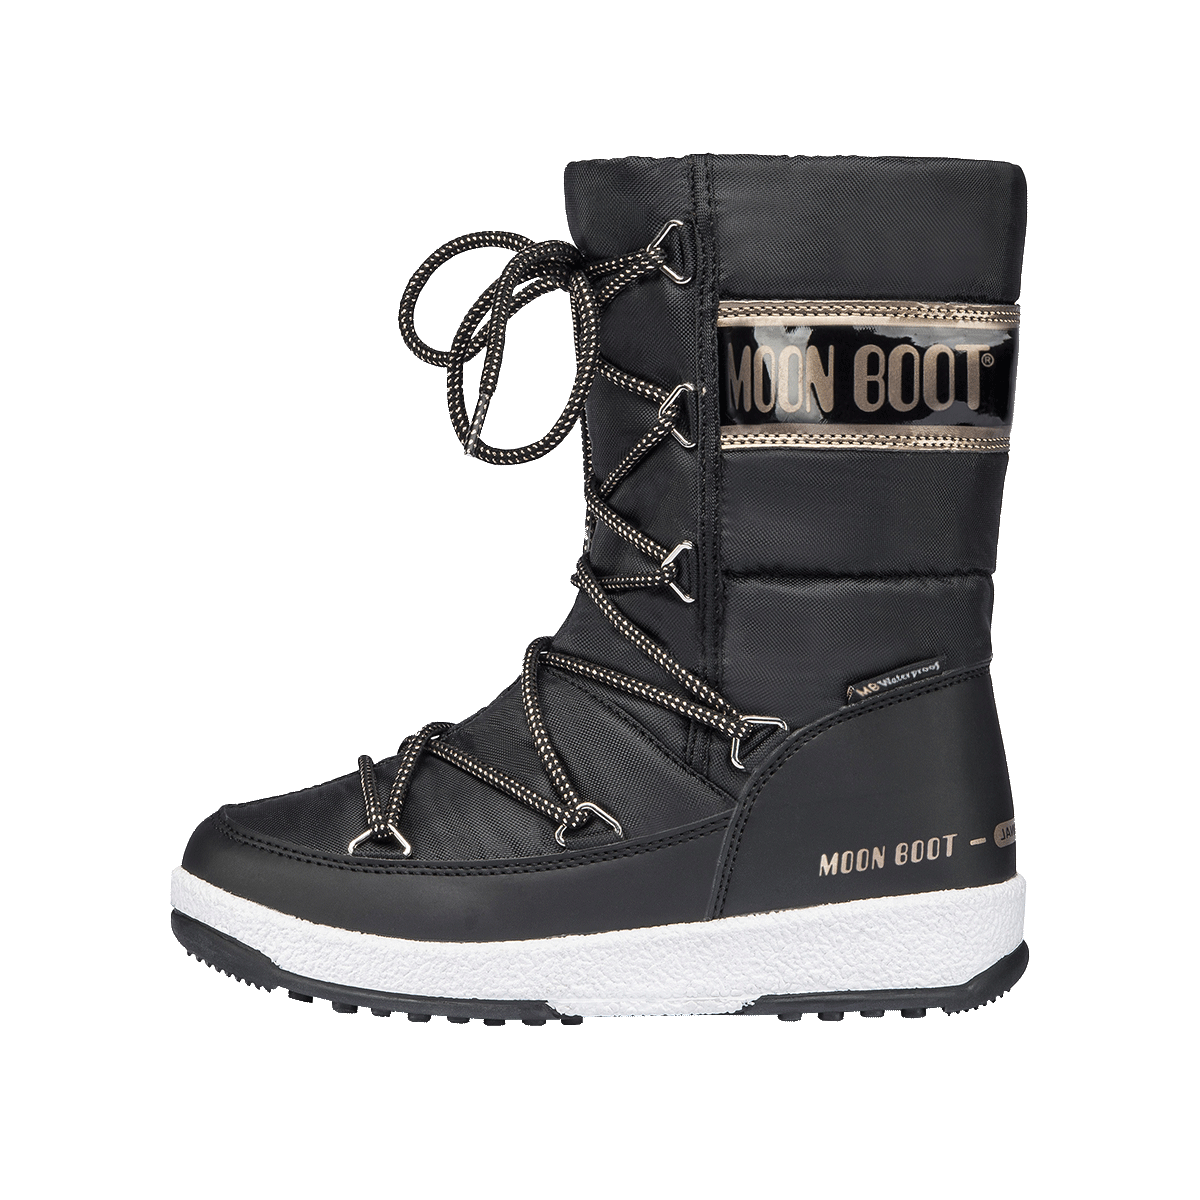 MOON BOOT JR G.QUILTED WP BLACK/COPPER BLACK/COPPER